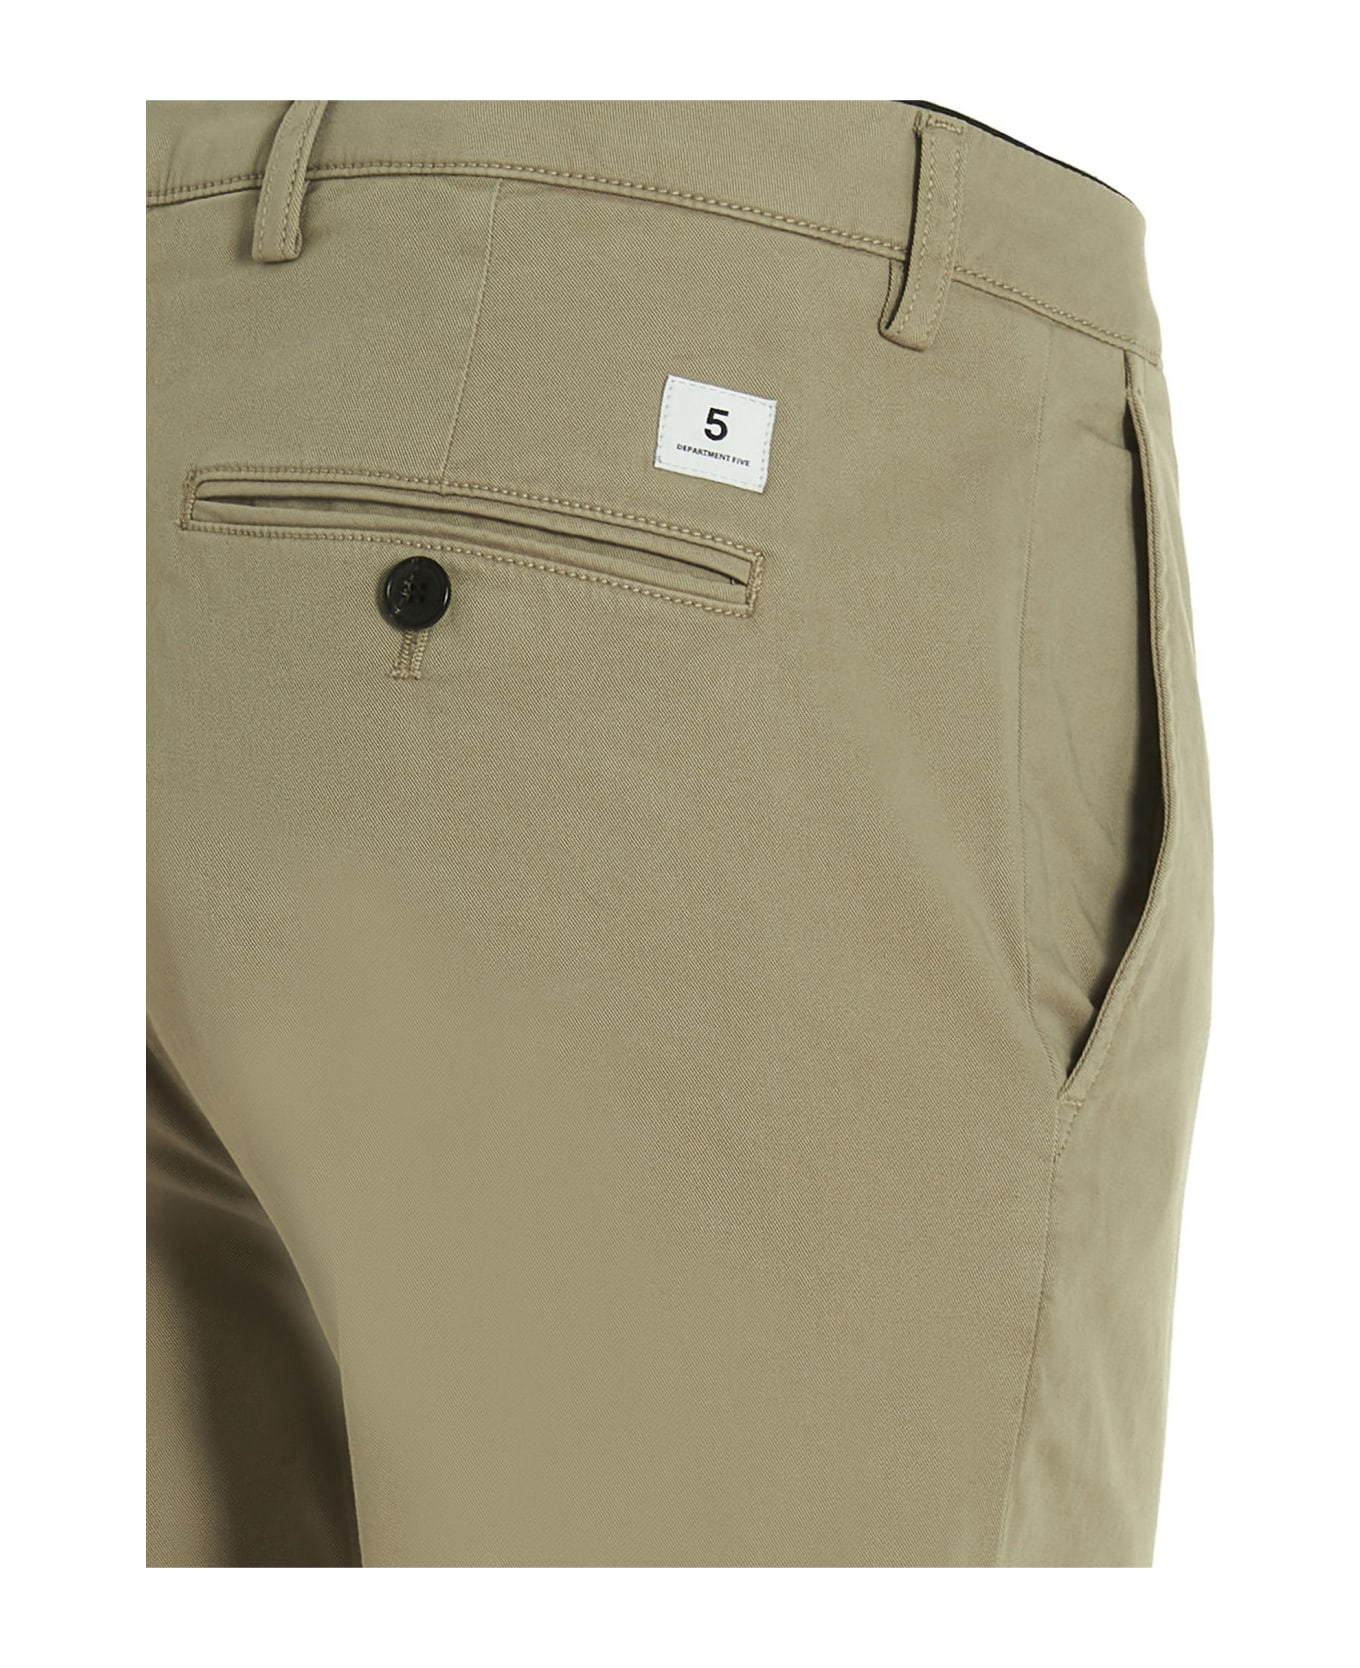 Department Five 'mike' Pants - BEIGE ボトムス